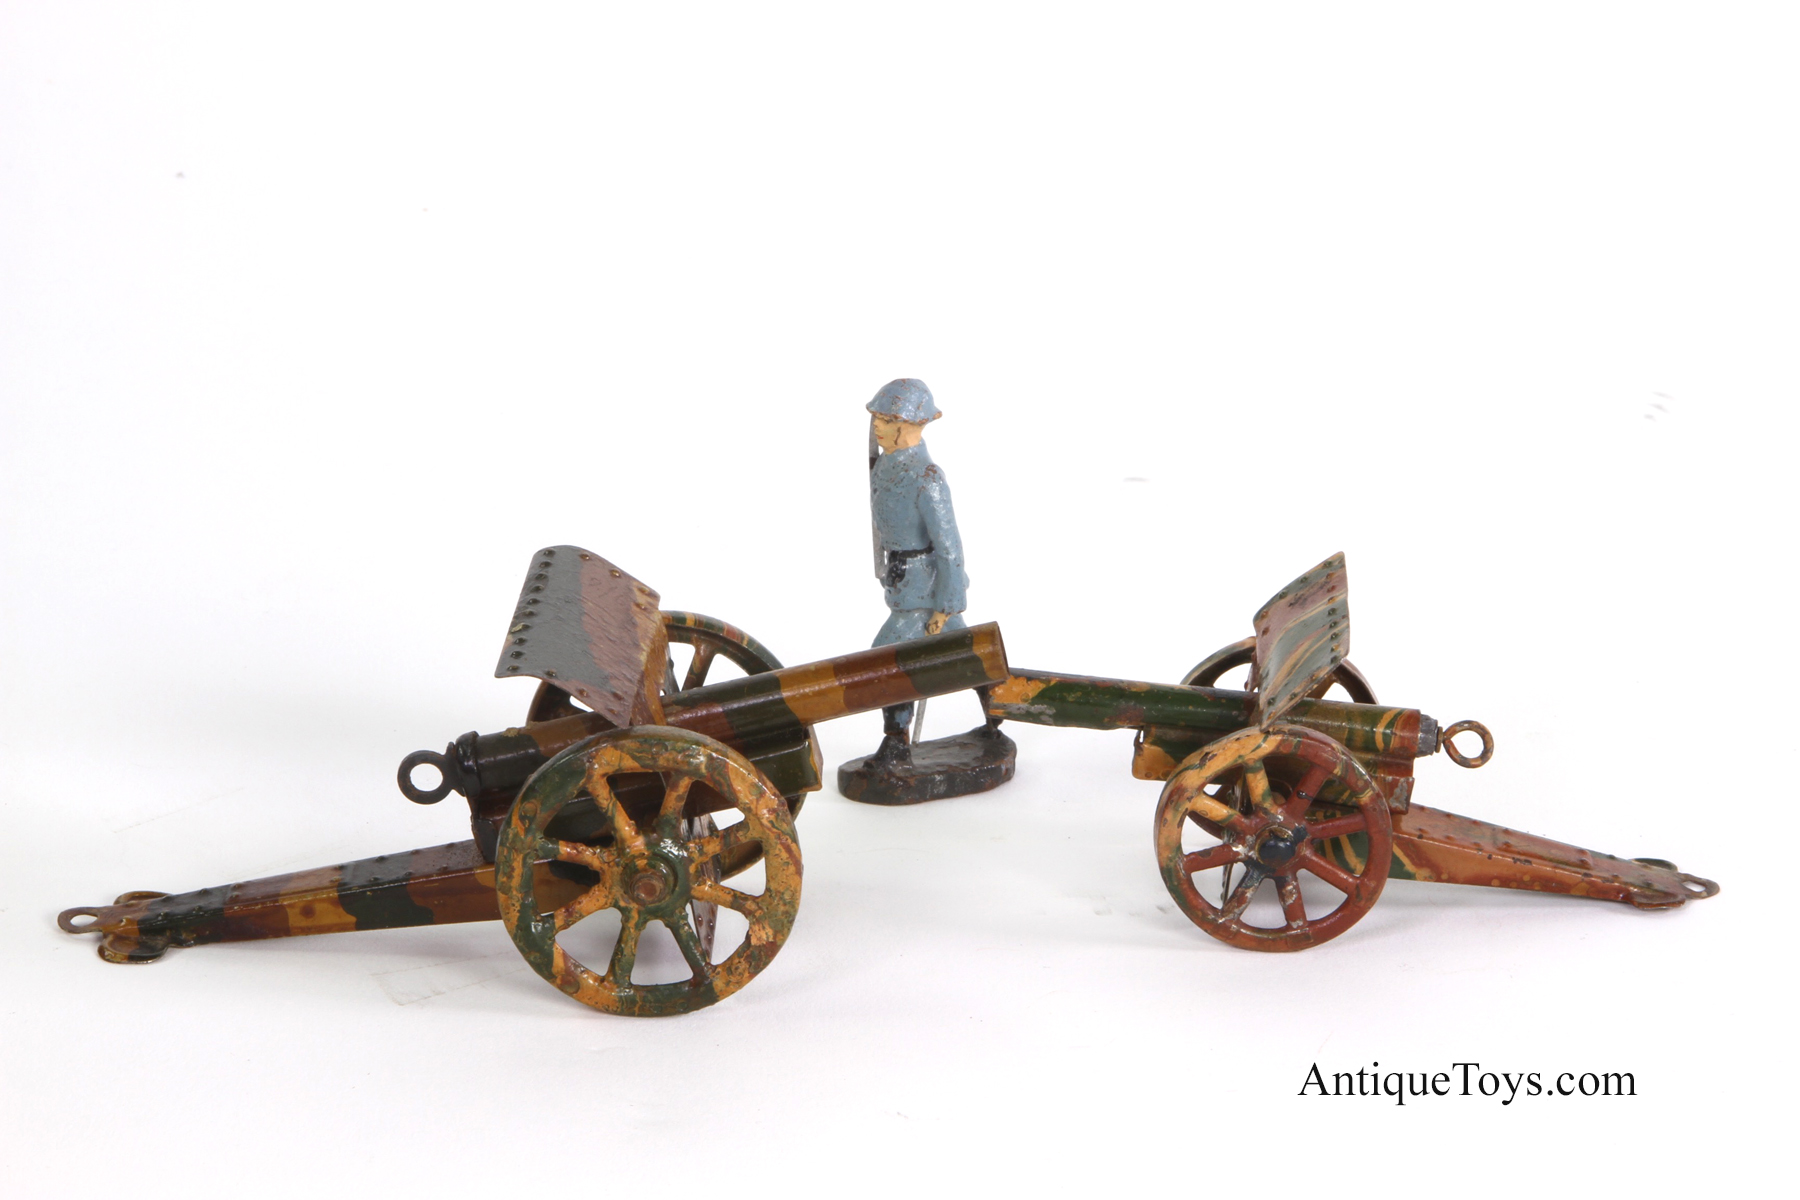 Marklin Toy Army Cannons from Germany - Antique Toys for Sale